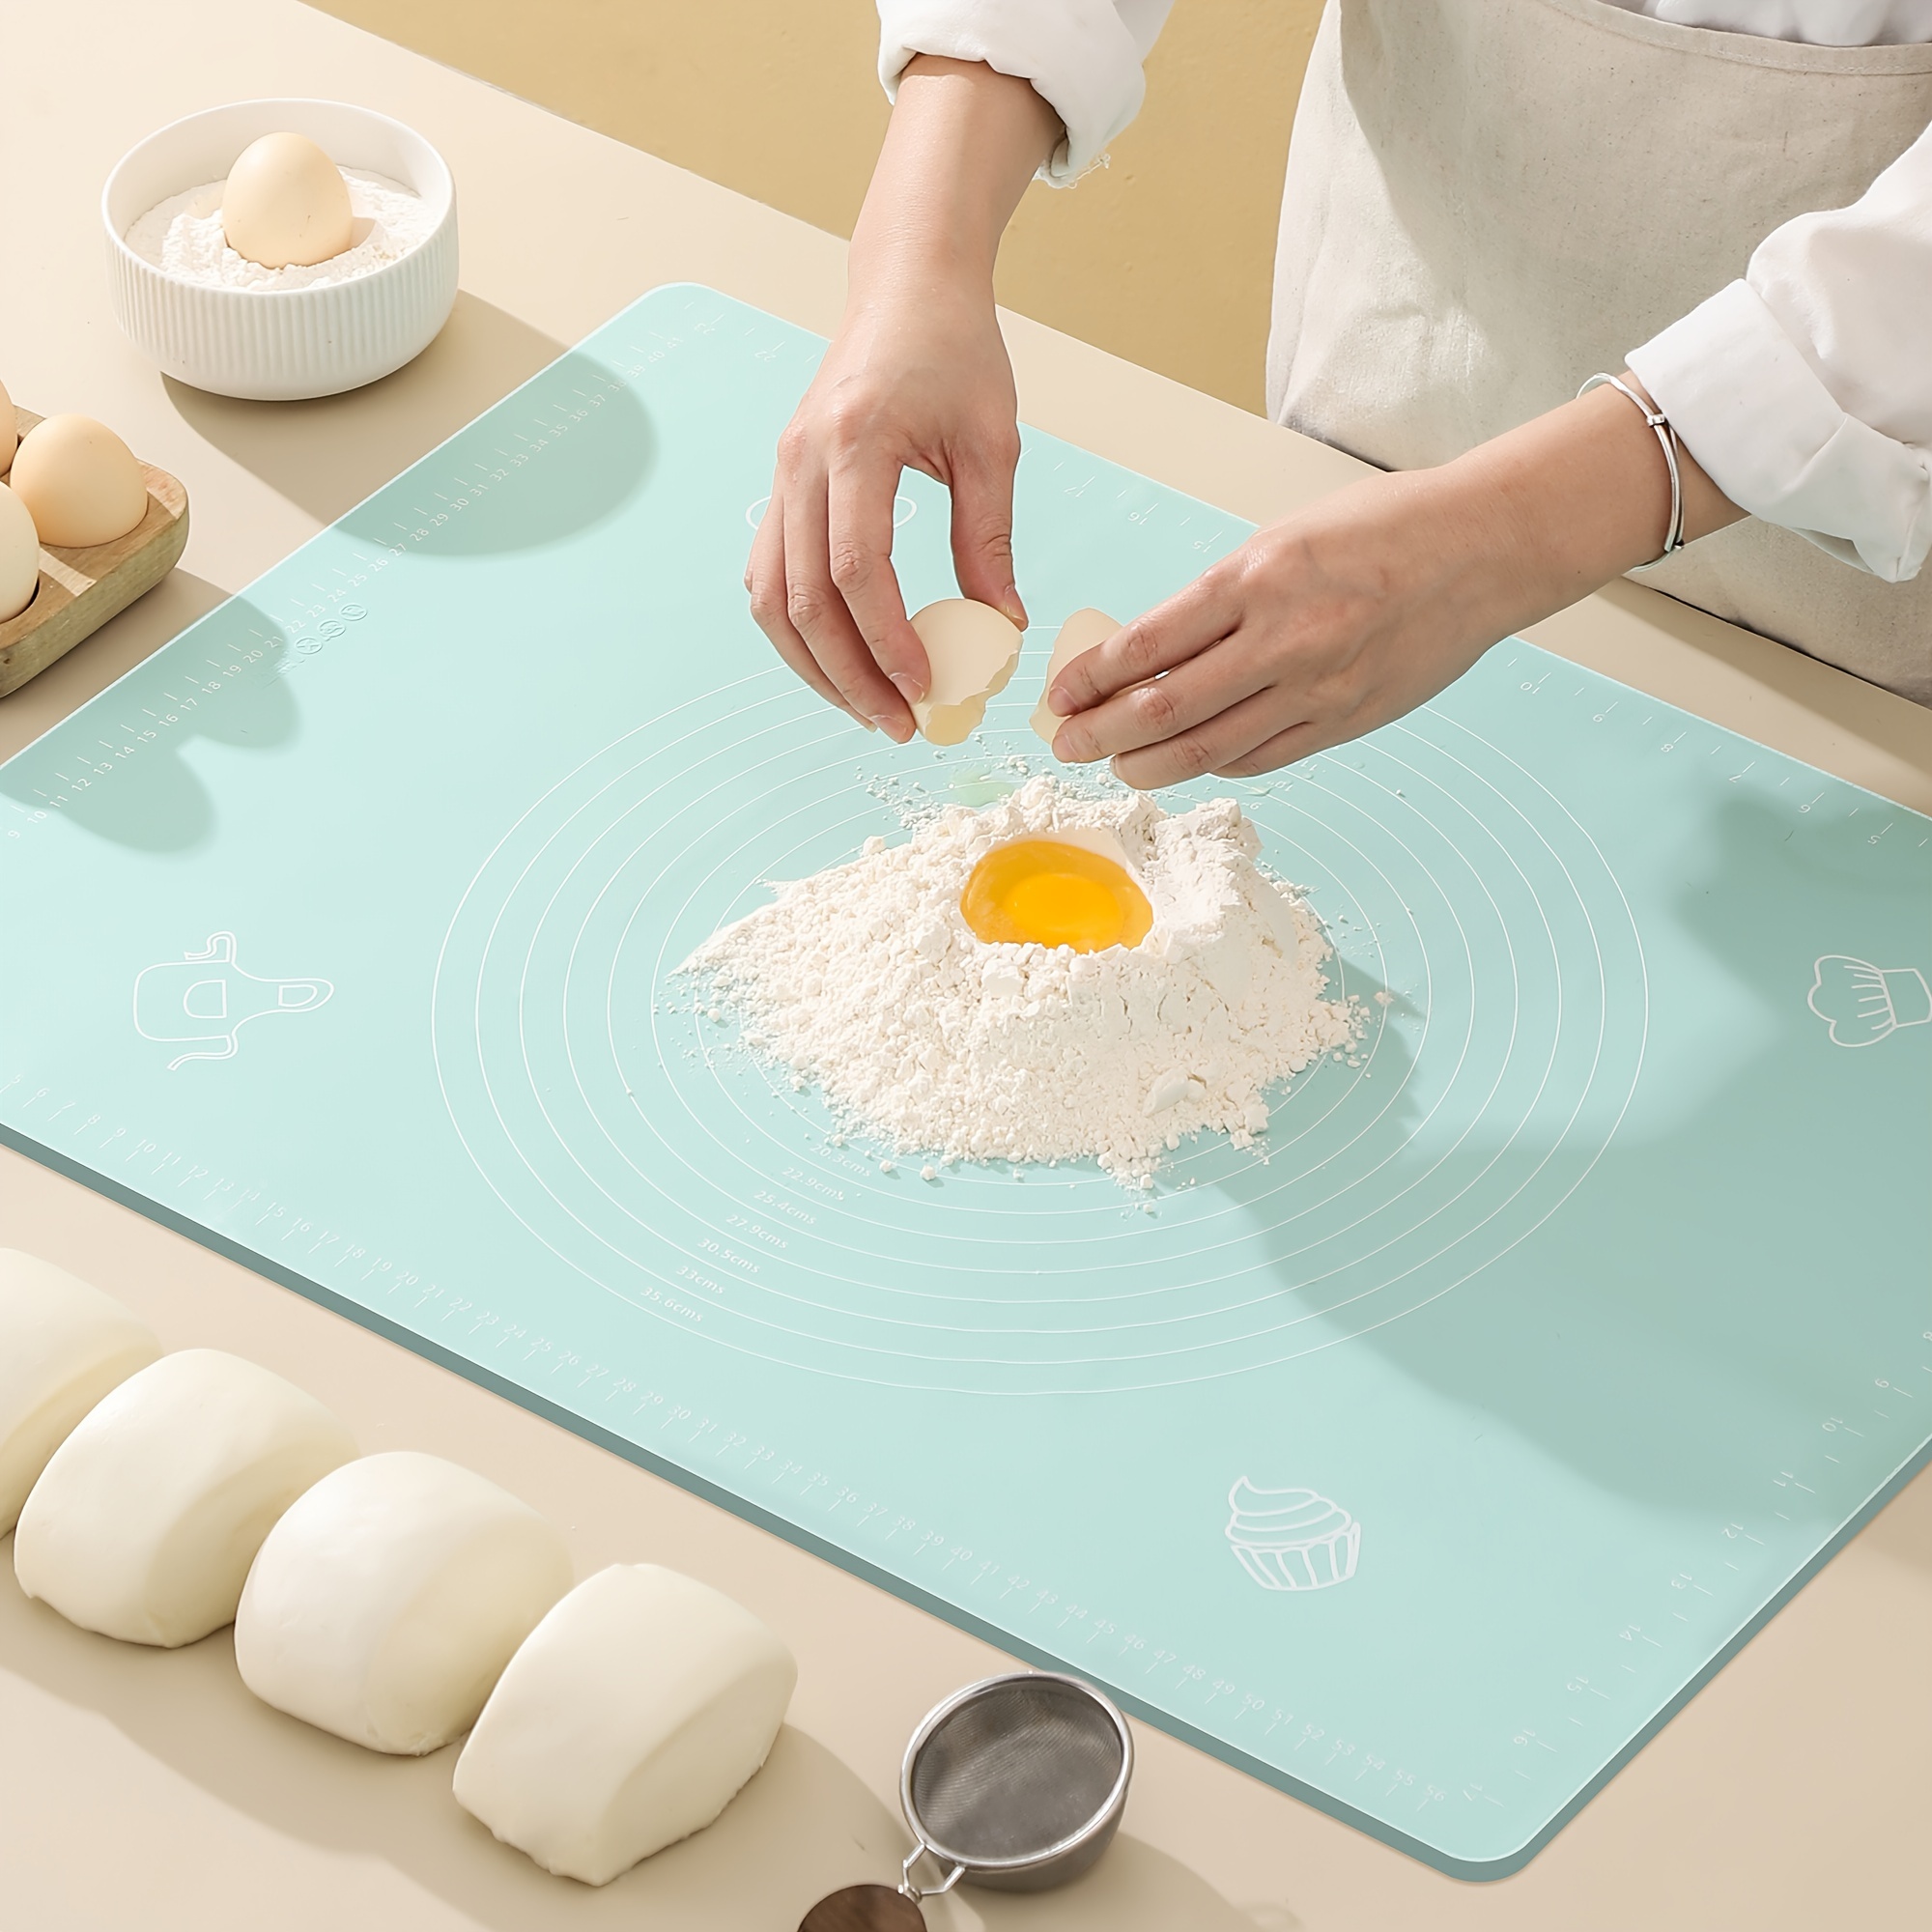 Kitchen Silicone Baking Mat New Non Slip Non Stick Silicone Pastry Pad for Rolling Out Dough, Baking Mats Silicone for Baking Cookie Sheets, Thick